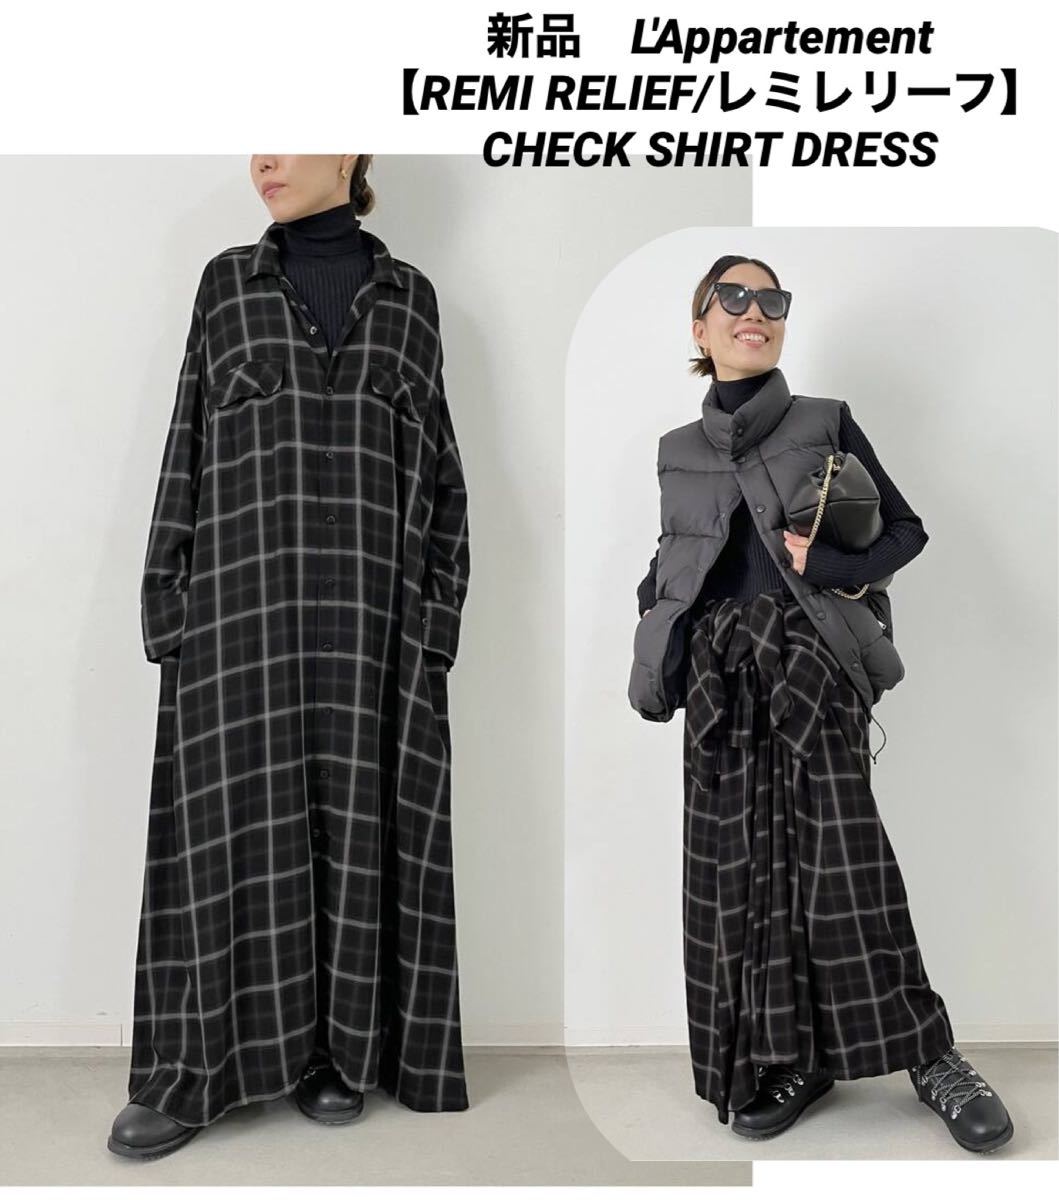 REMI RELIEF/レミレリーフ】CHECK SHIRT DRESS L'Appartement｜PayPay